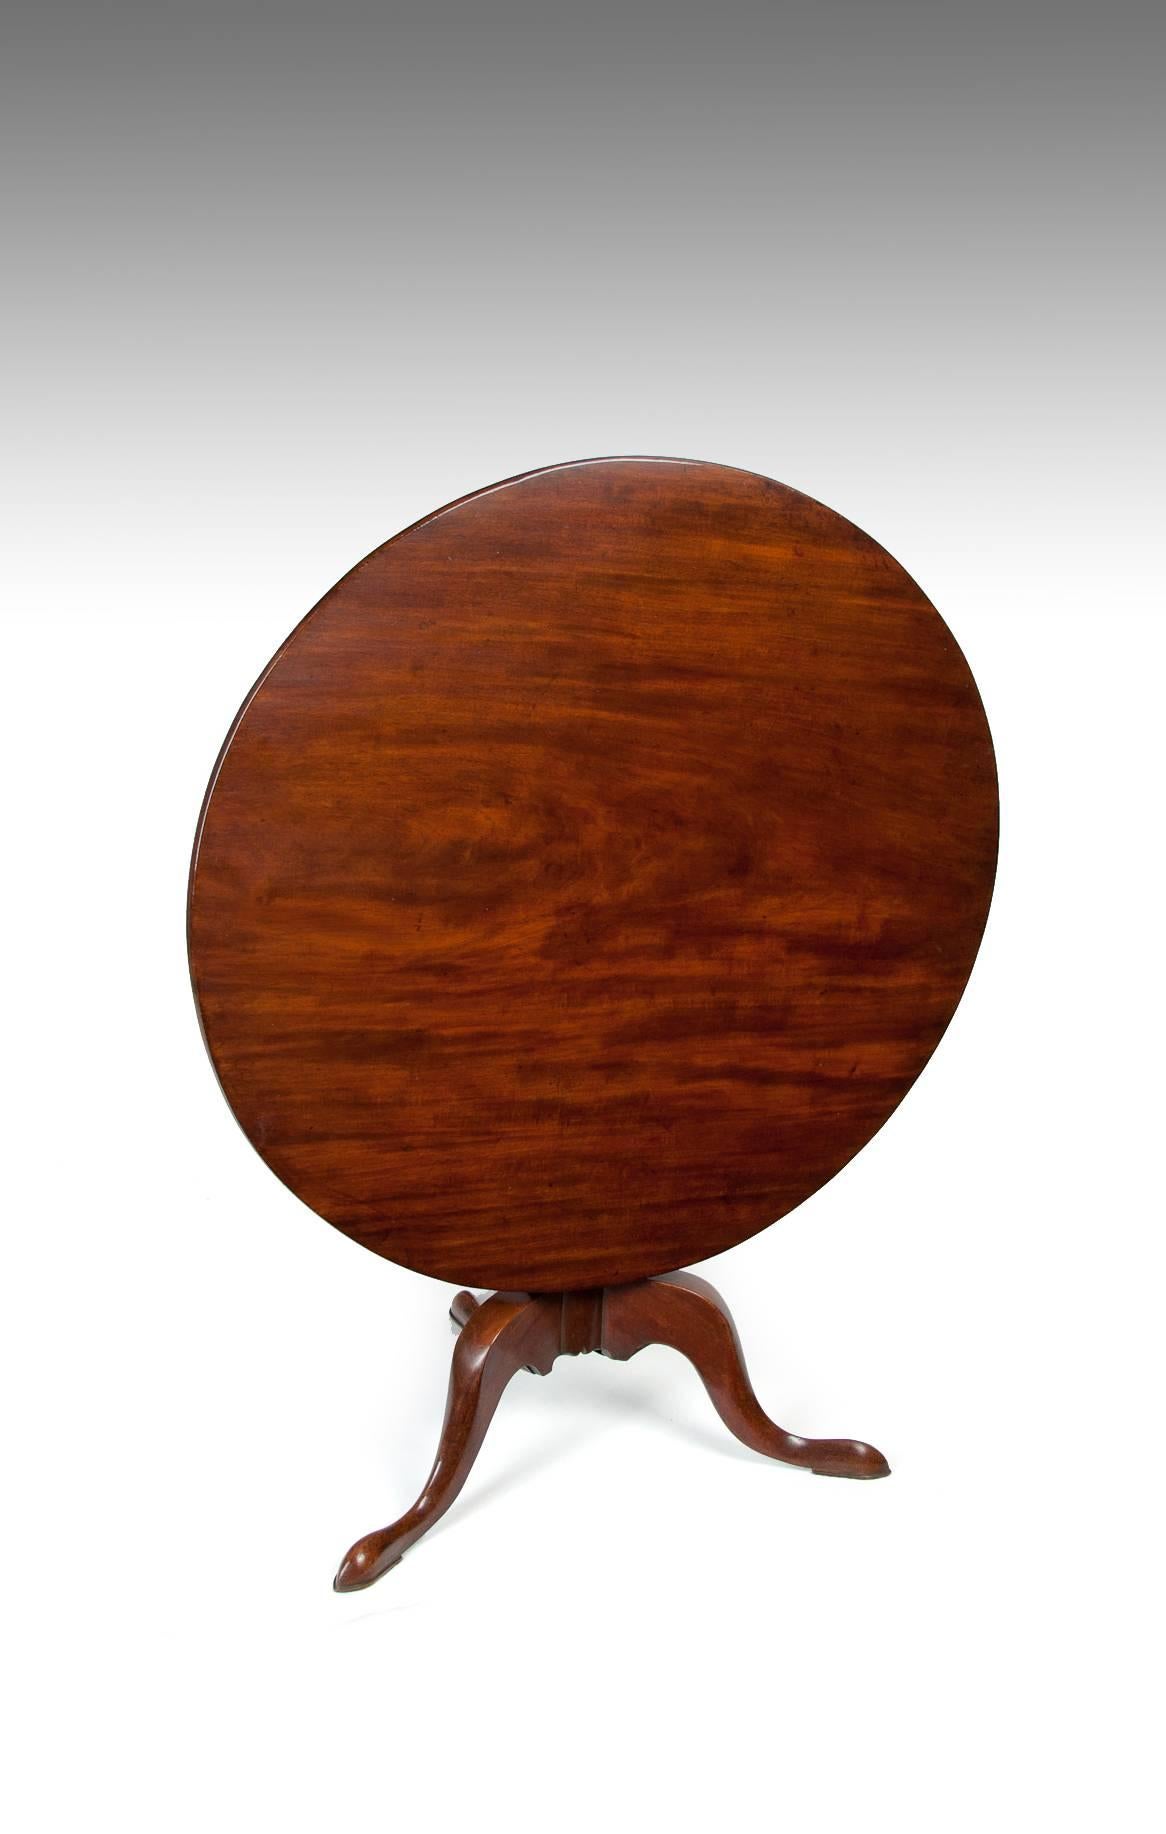 A large George III 3 ¼ foot (approximate 1m) diameter solid mahogany tripod / supper table, circa 1770.
The fine quality large sized well figured mahogany circular hinged top supported by a vase shaped central column on cabriole tripod legs